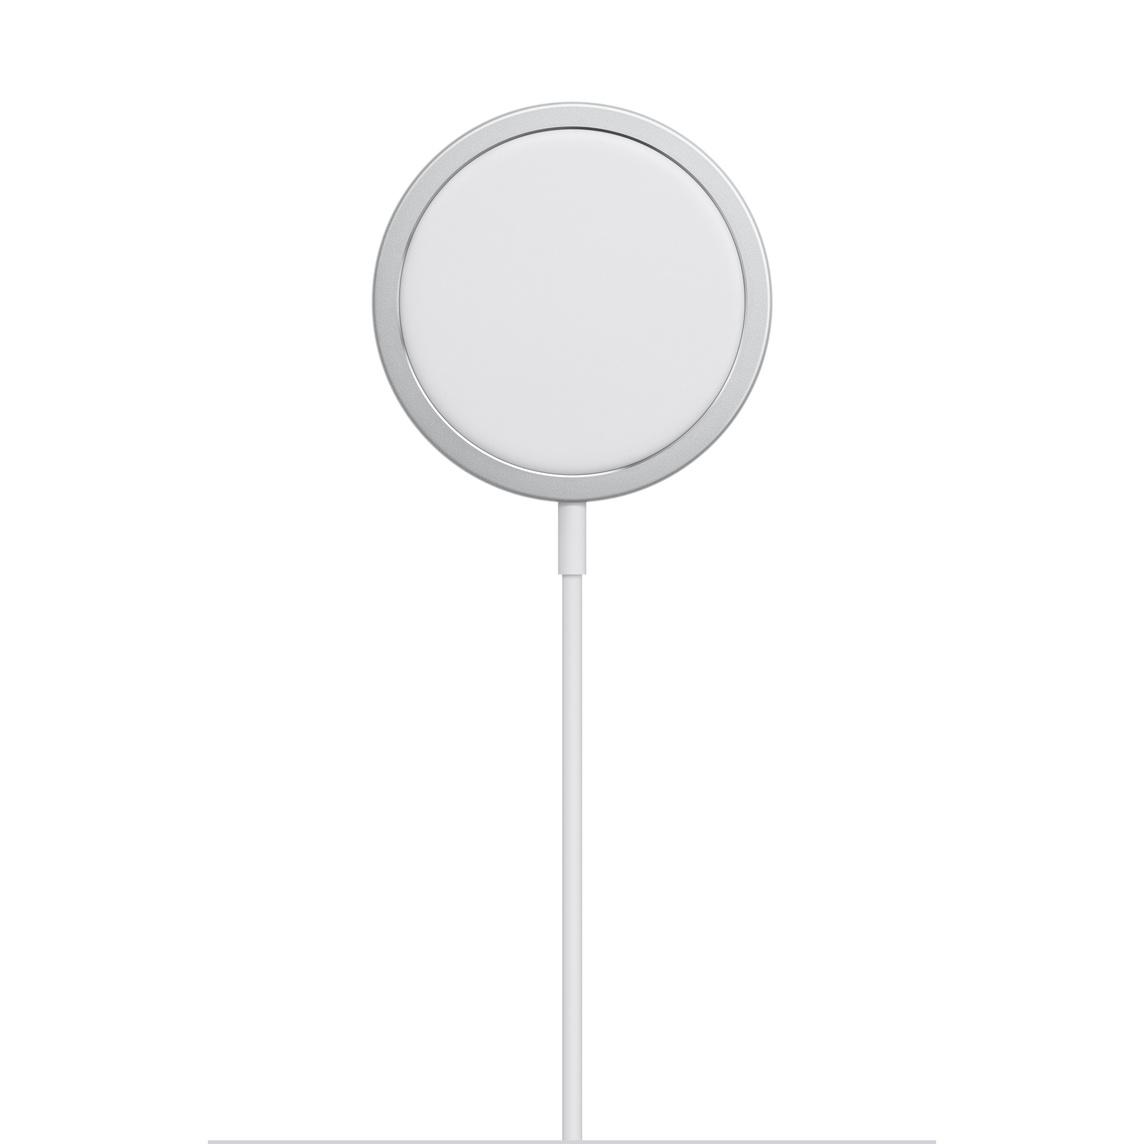 The MagSafe Charger features perfectly aligned magnets to provide faster wireless charging up to 15 watts.